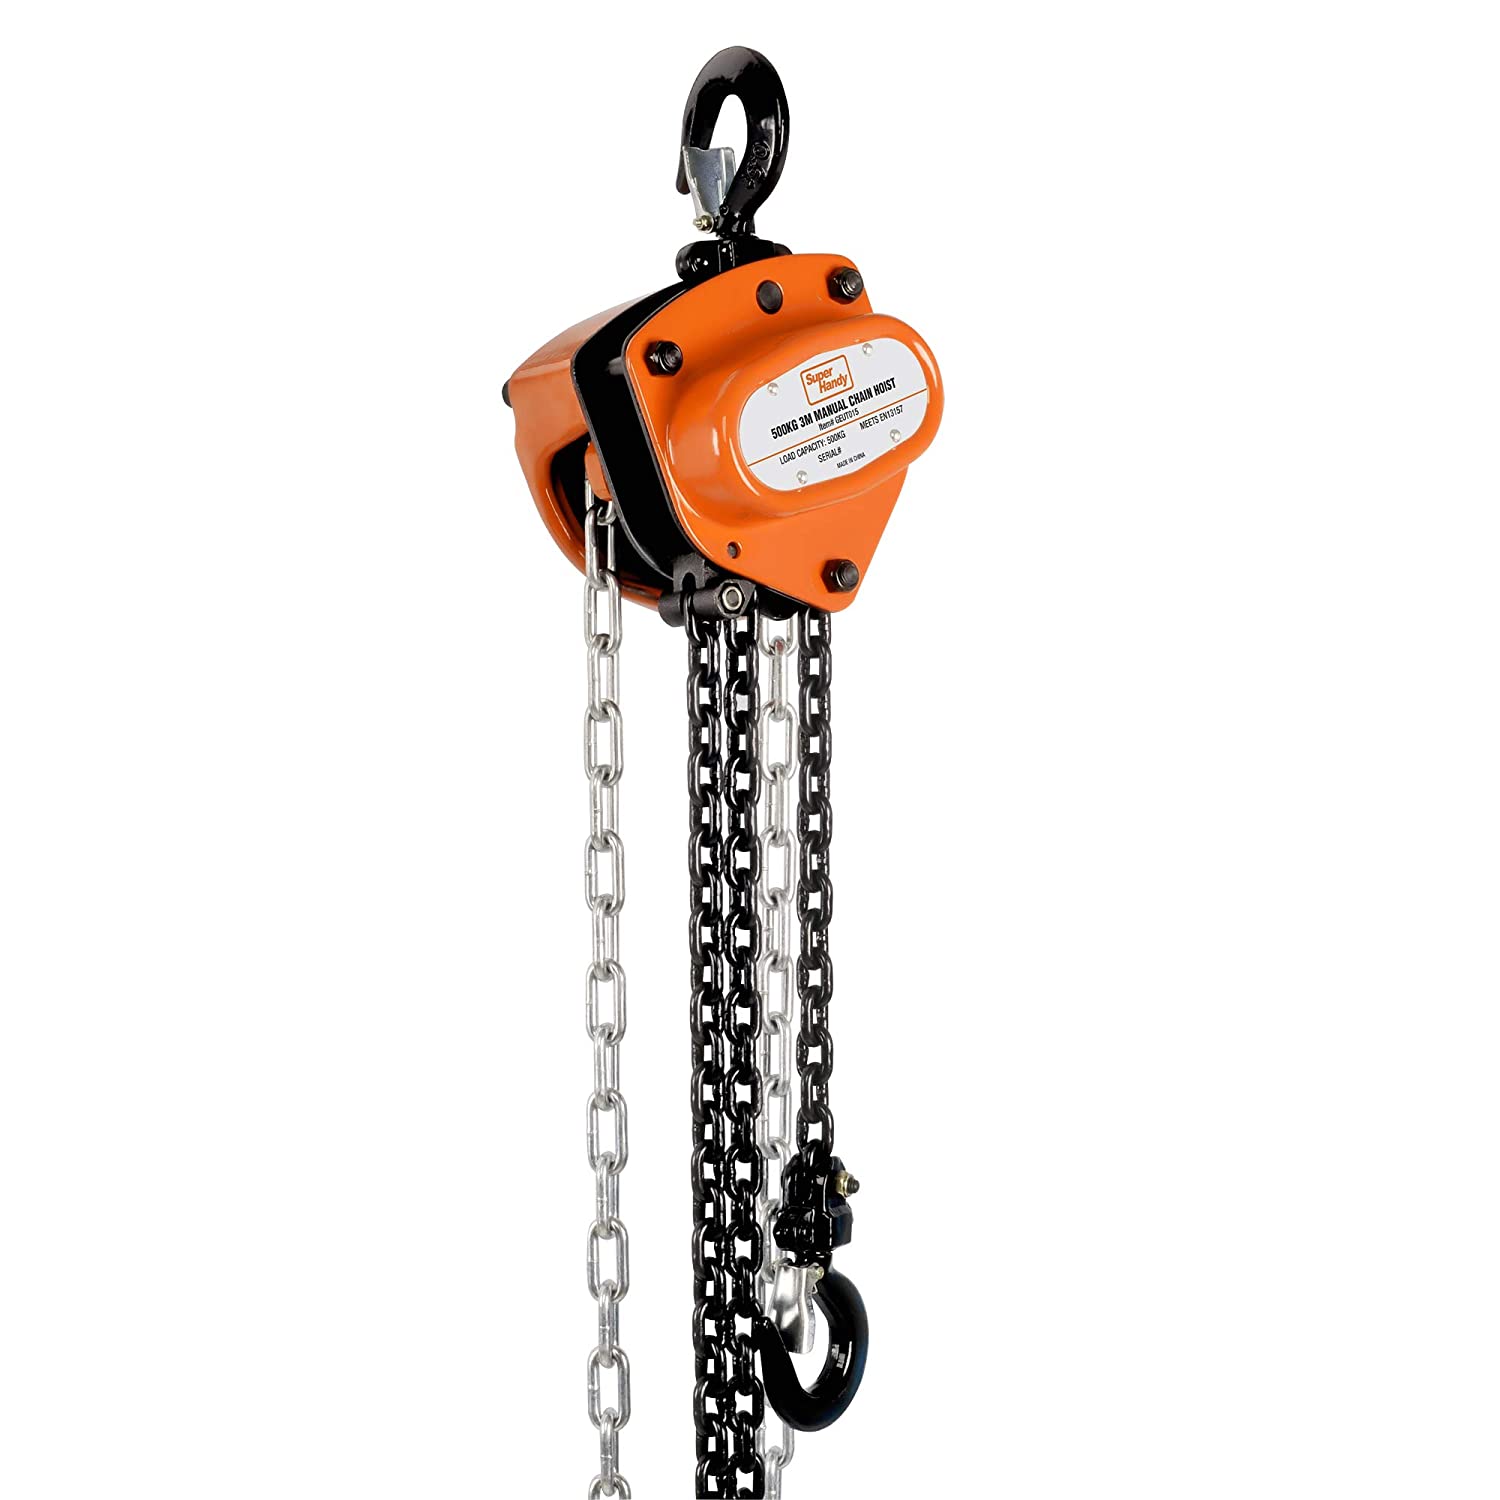 SuperHandy Manual Chain Block Hoist Come Along 1/2 Ton 1100Lbs - a MAX Lift of 10 Feet, Head Room of 11" inch and Load Chain Diameter of 5mm at a MAX weight capacity of 1/2 TON 1100LBS (500Kg) - Great Circle UK